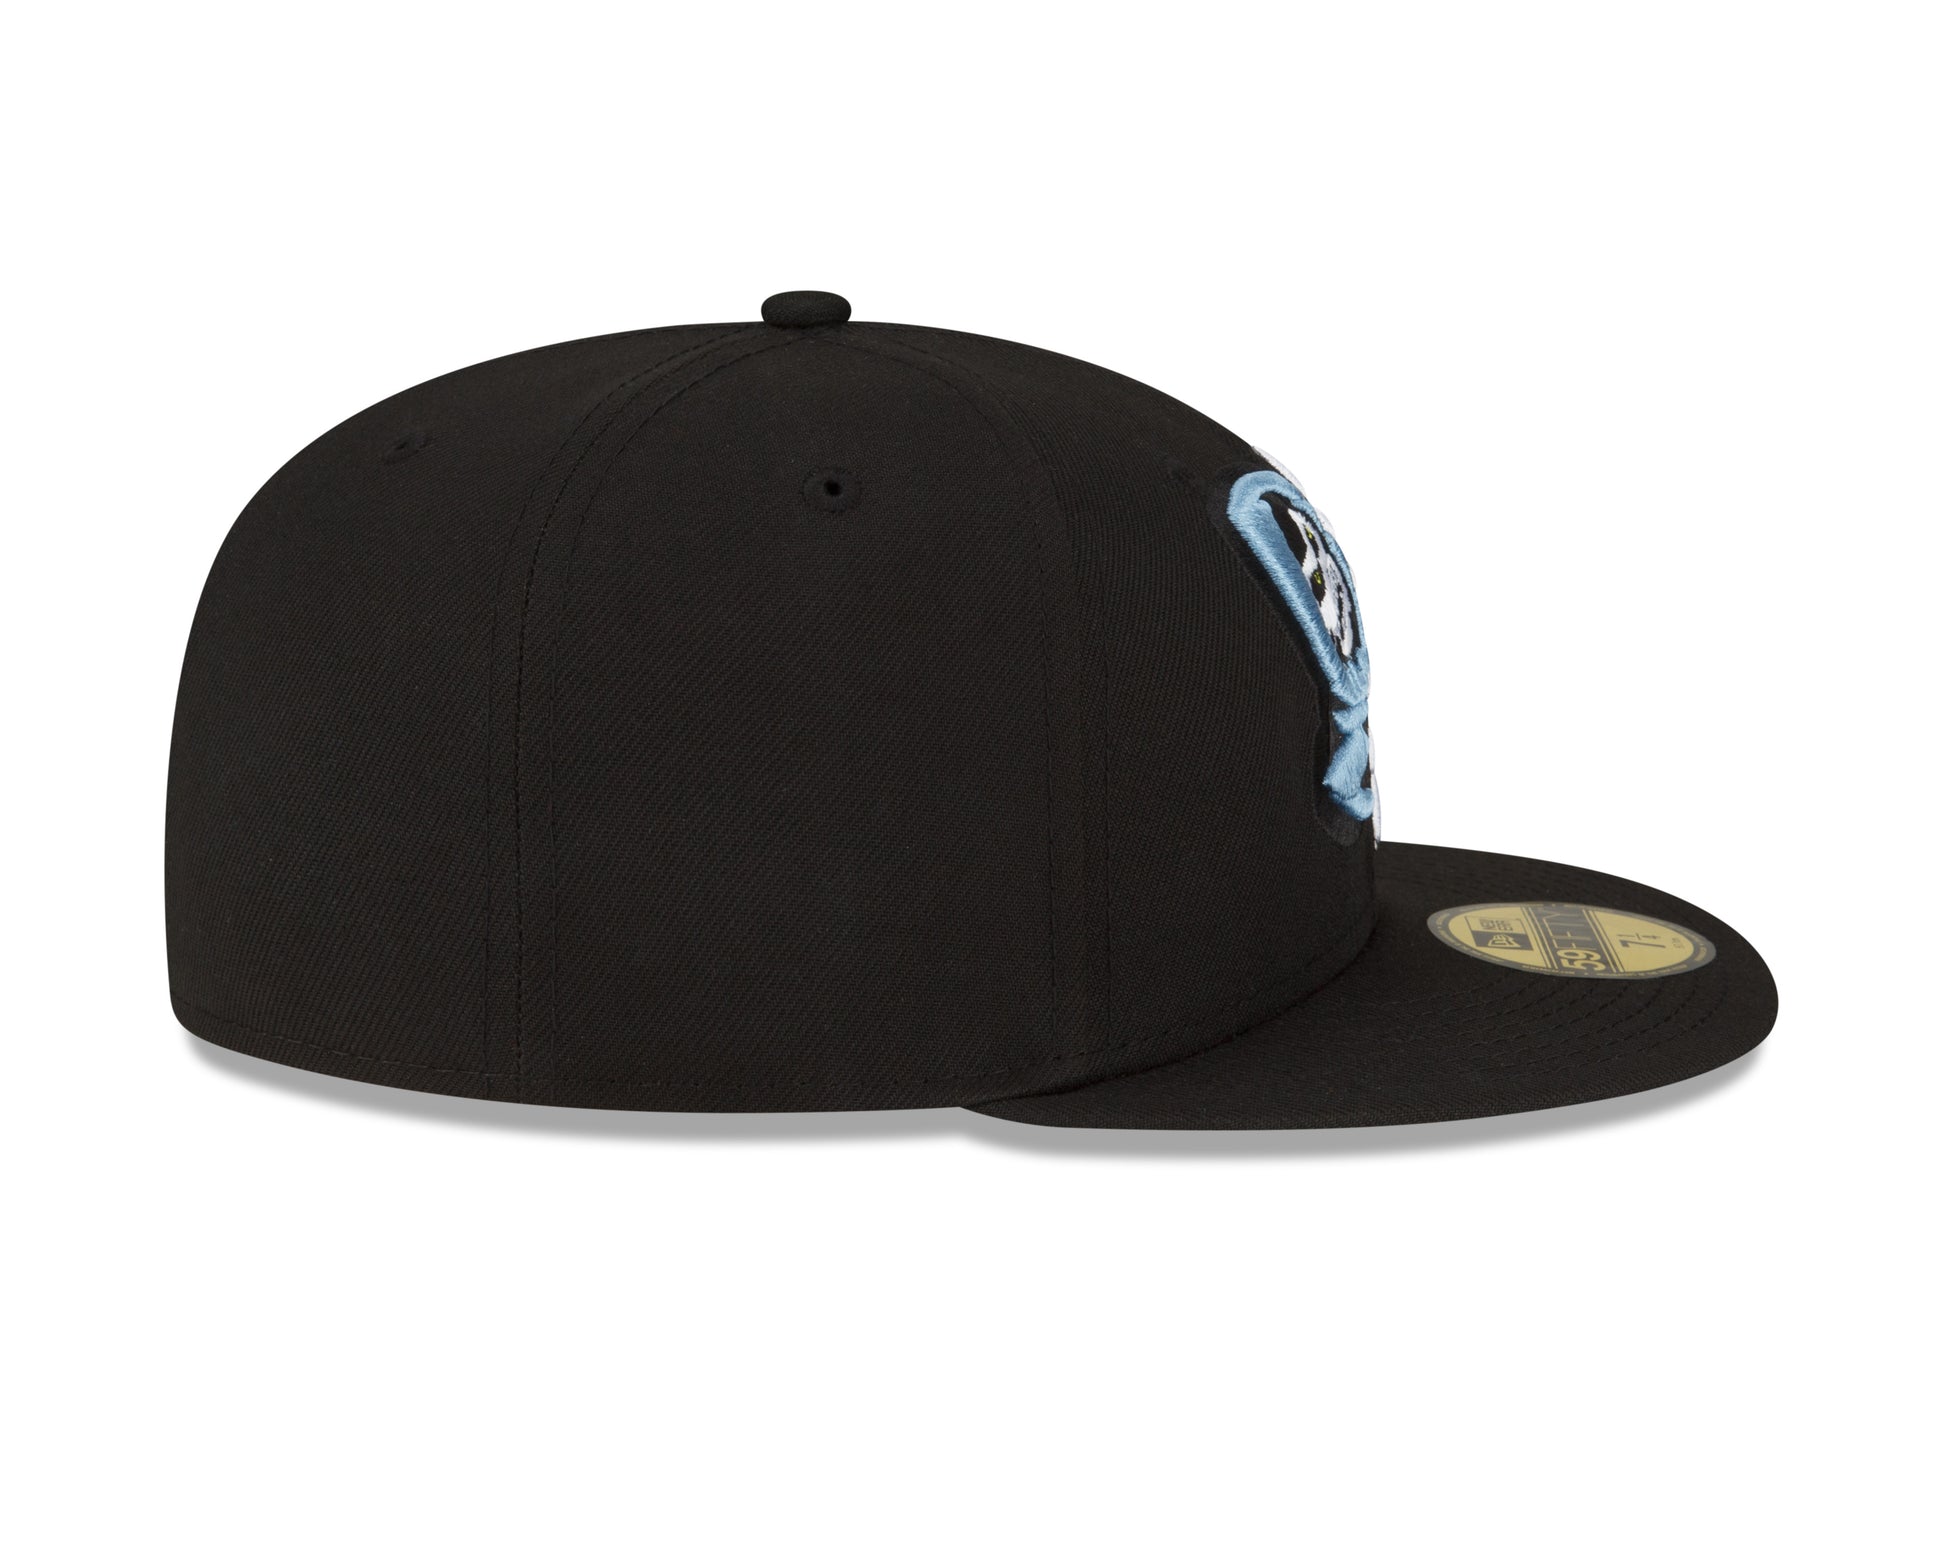 New Era - 59fifty Fitted - MiLB - COPA - Inland Empire 66ers - Black - Headz Up 